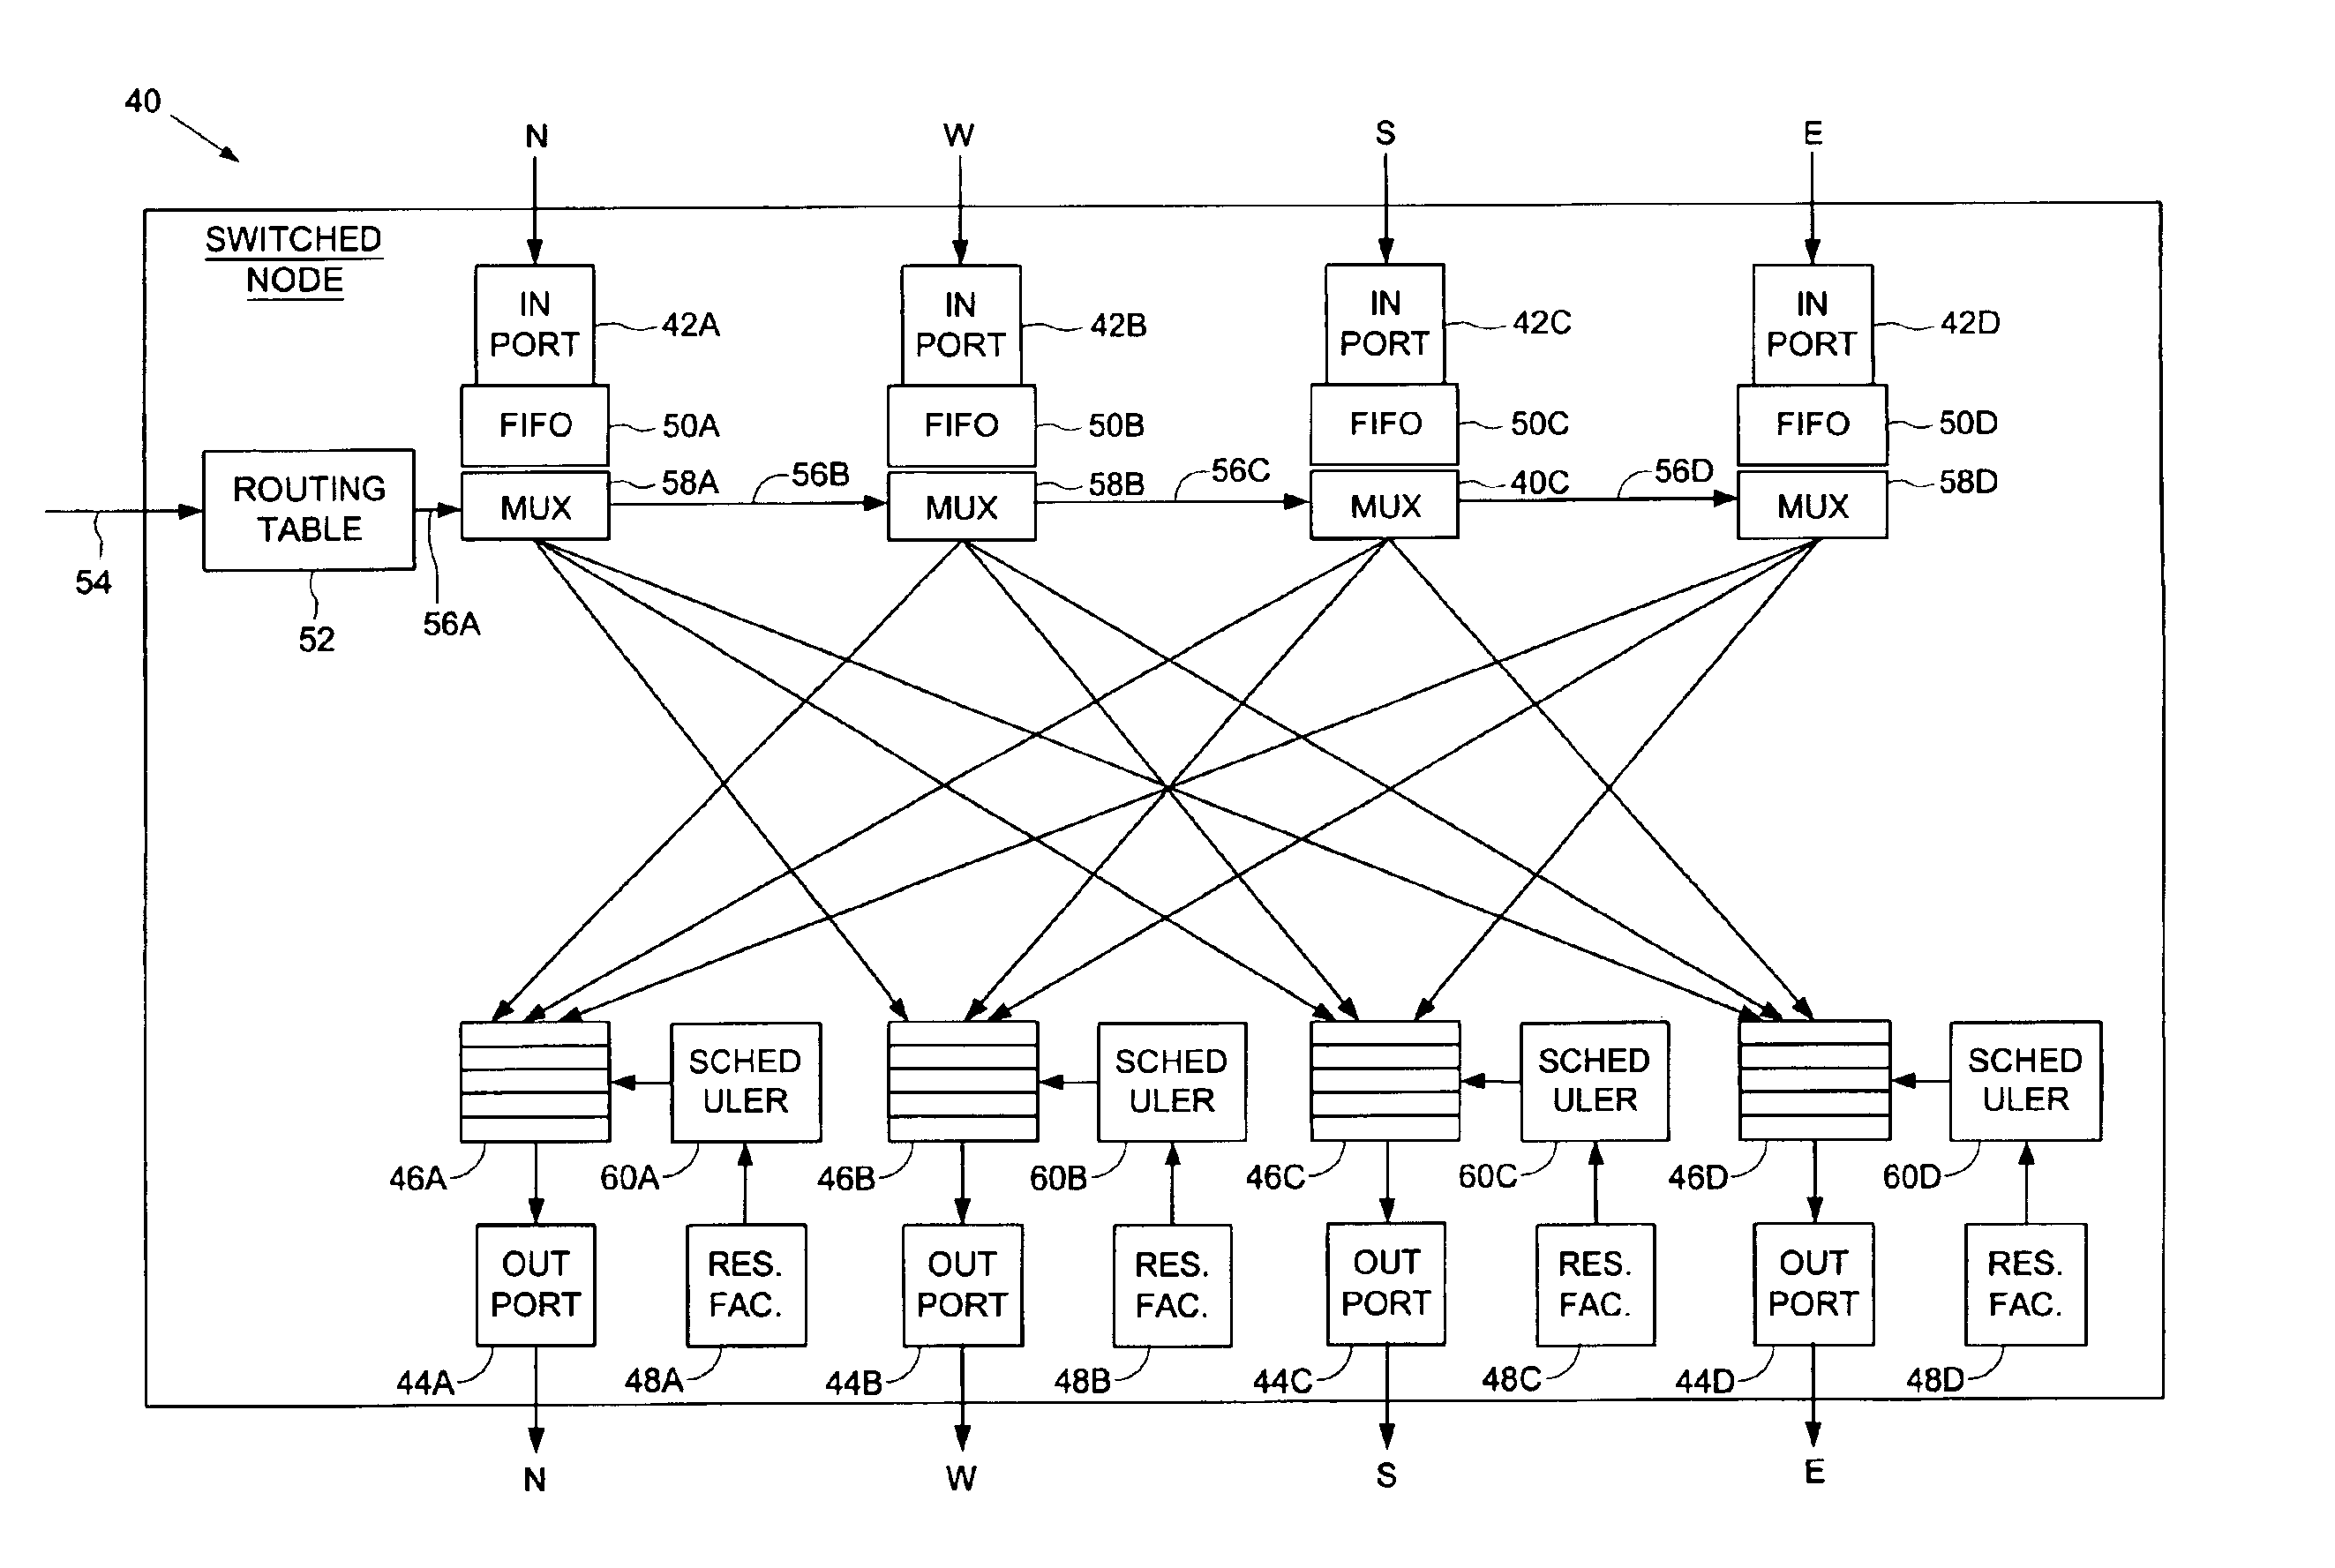 Distributed resource reservation system for establishing a path through a multi-dimensional computer network to support isochronous data